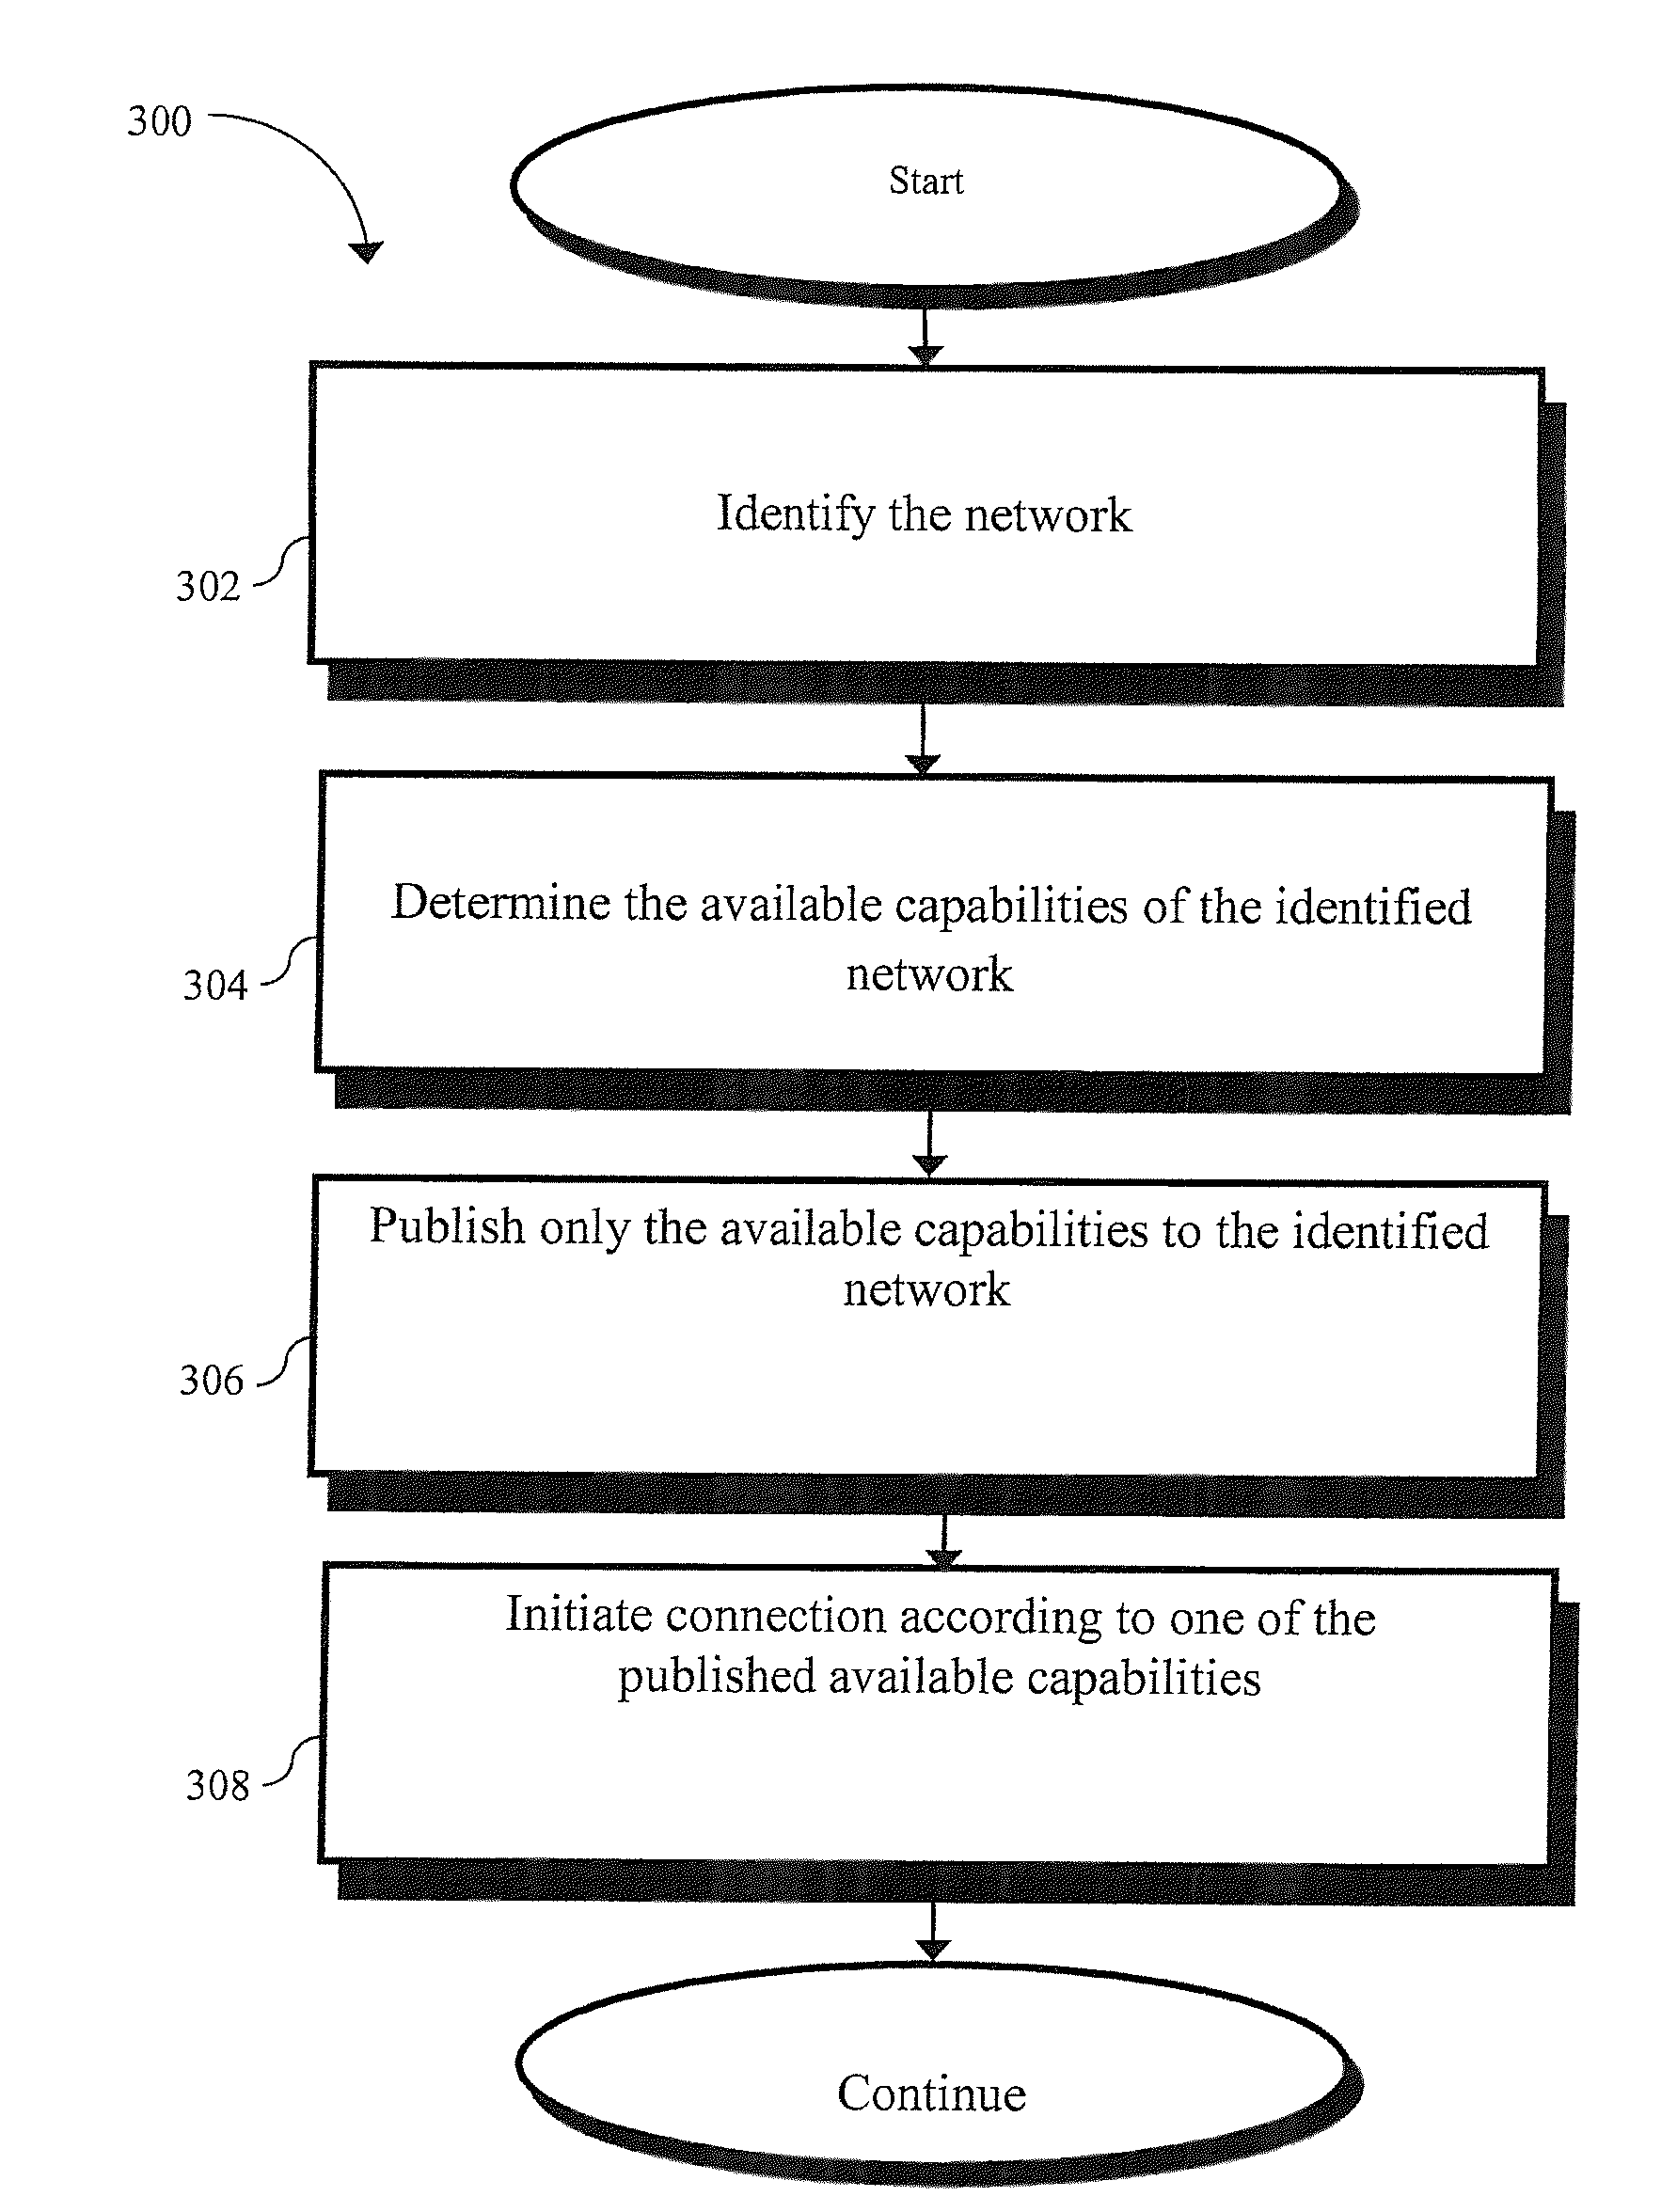 Methods and apparatus for client-based capabilities management for communications networks